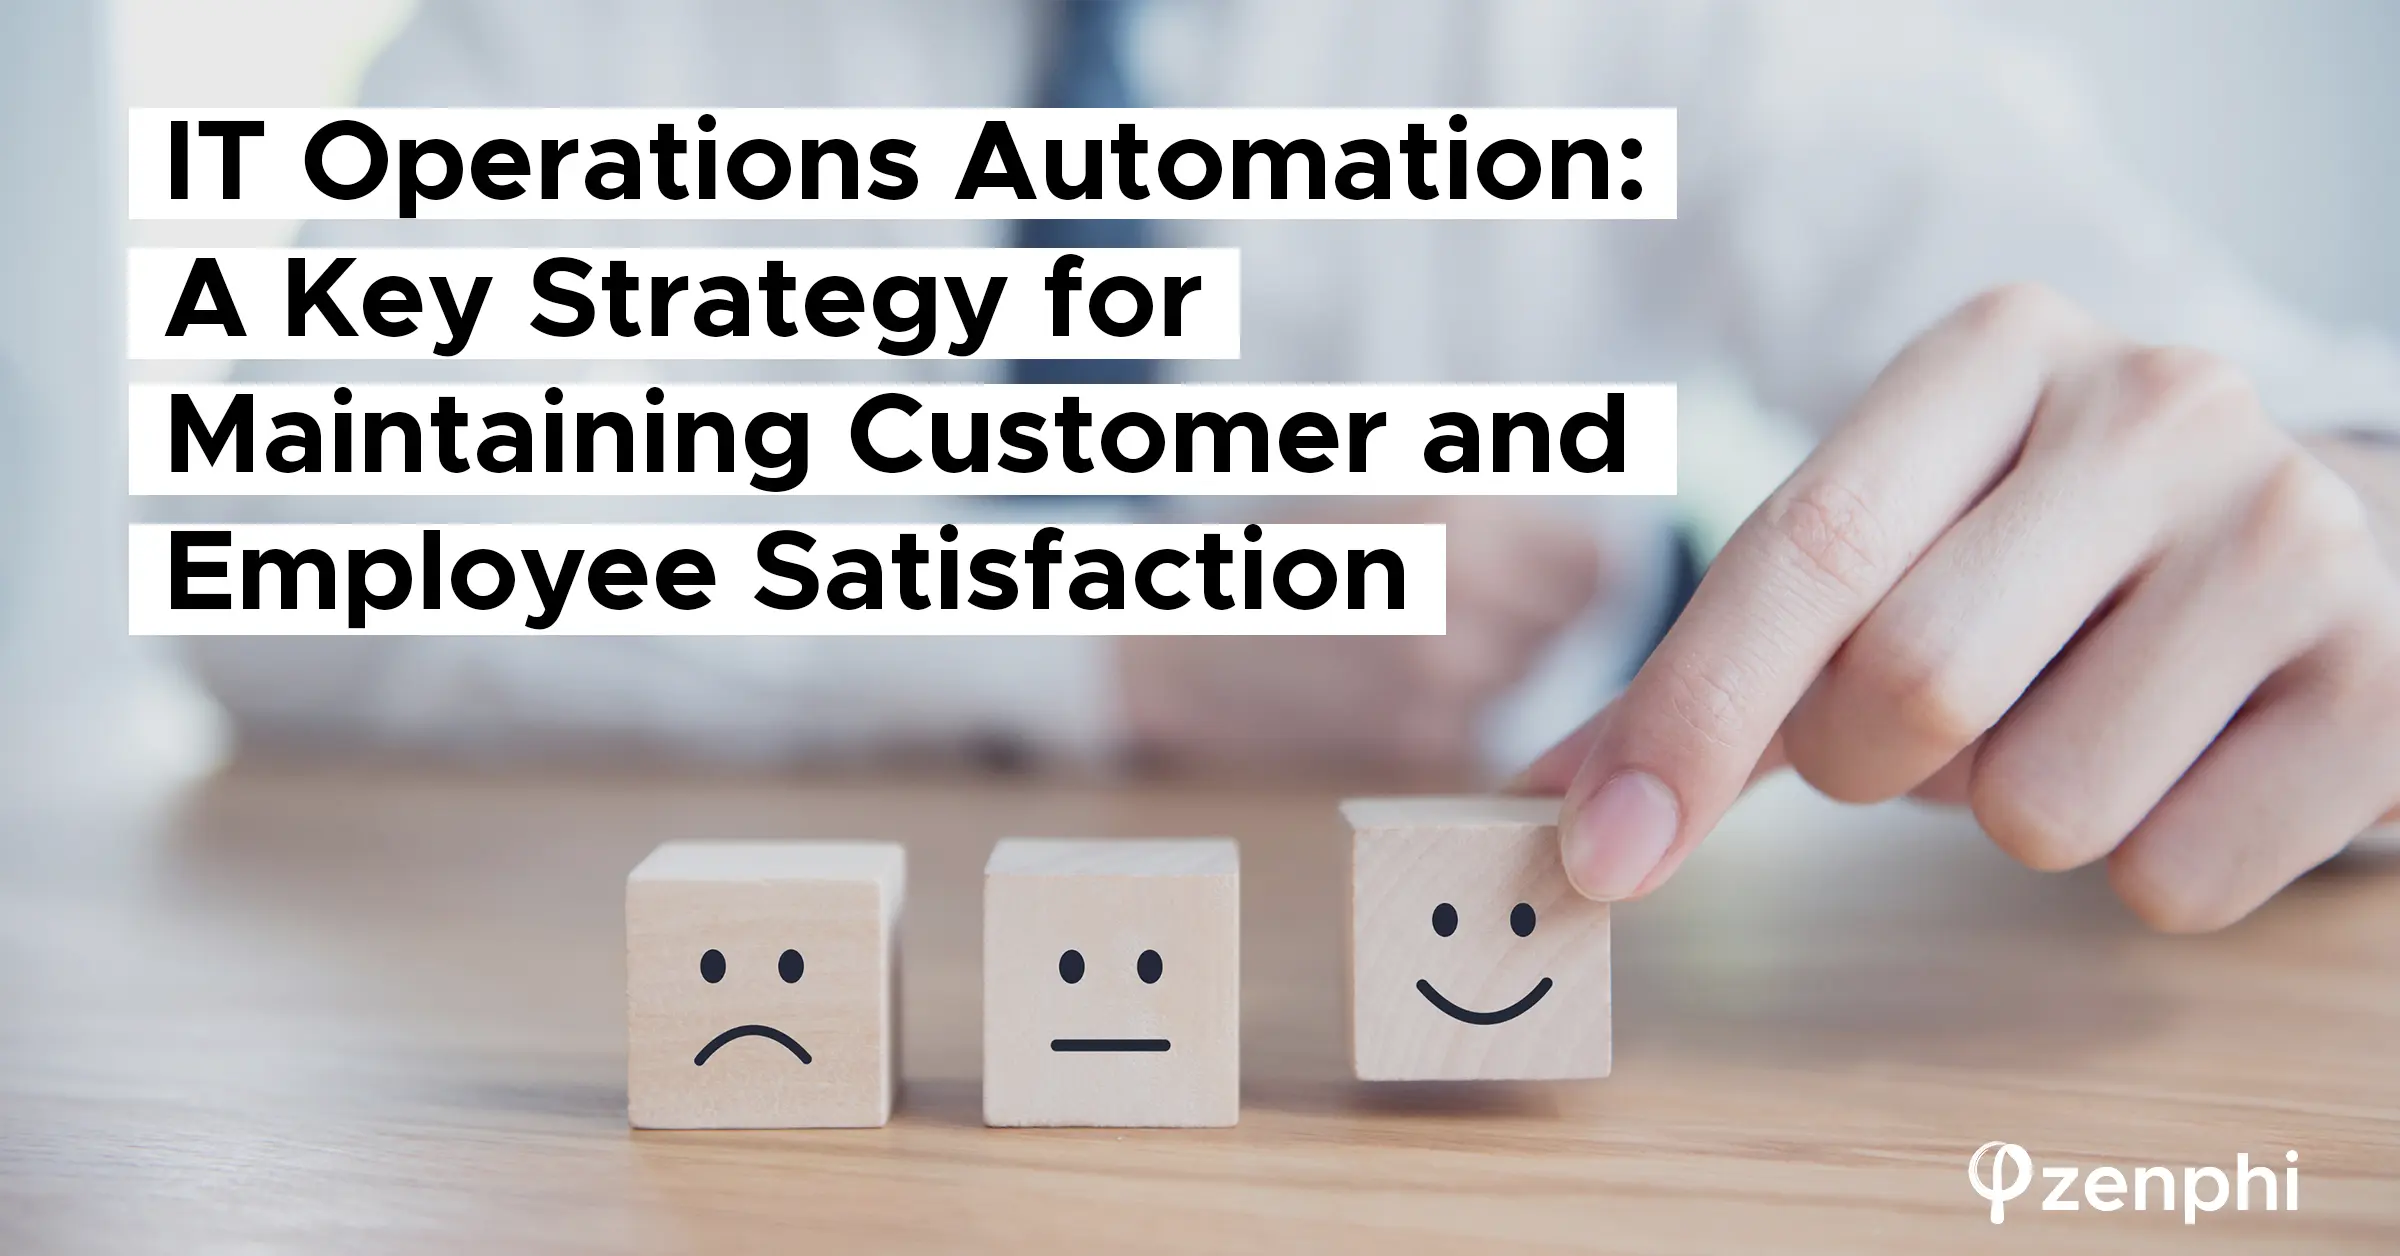 IT Operations Automation: A Key Strategy for Maintaining Customer and Employee Satisfaction